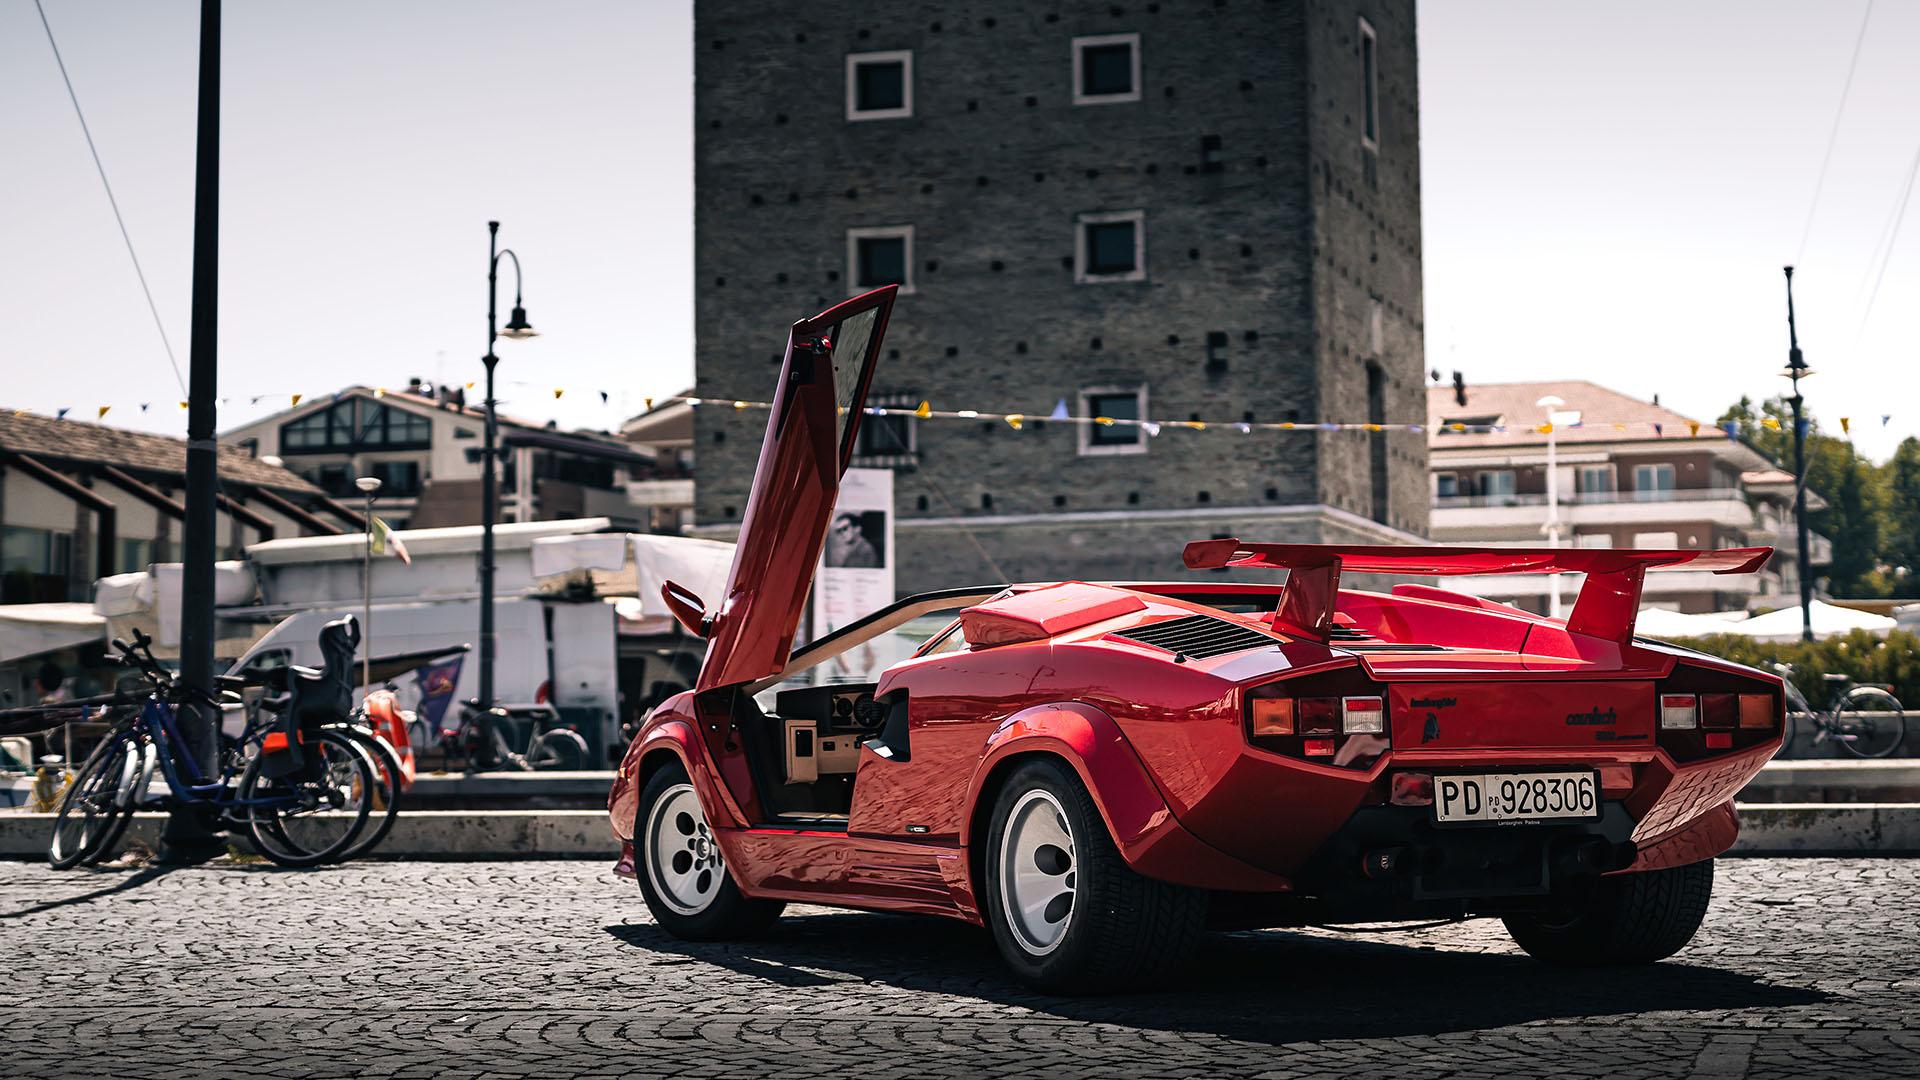 Countach and lm002 v12 11